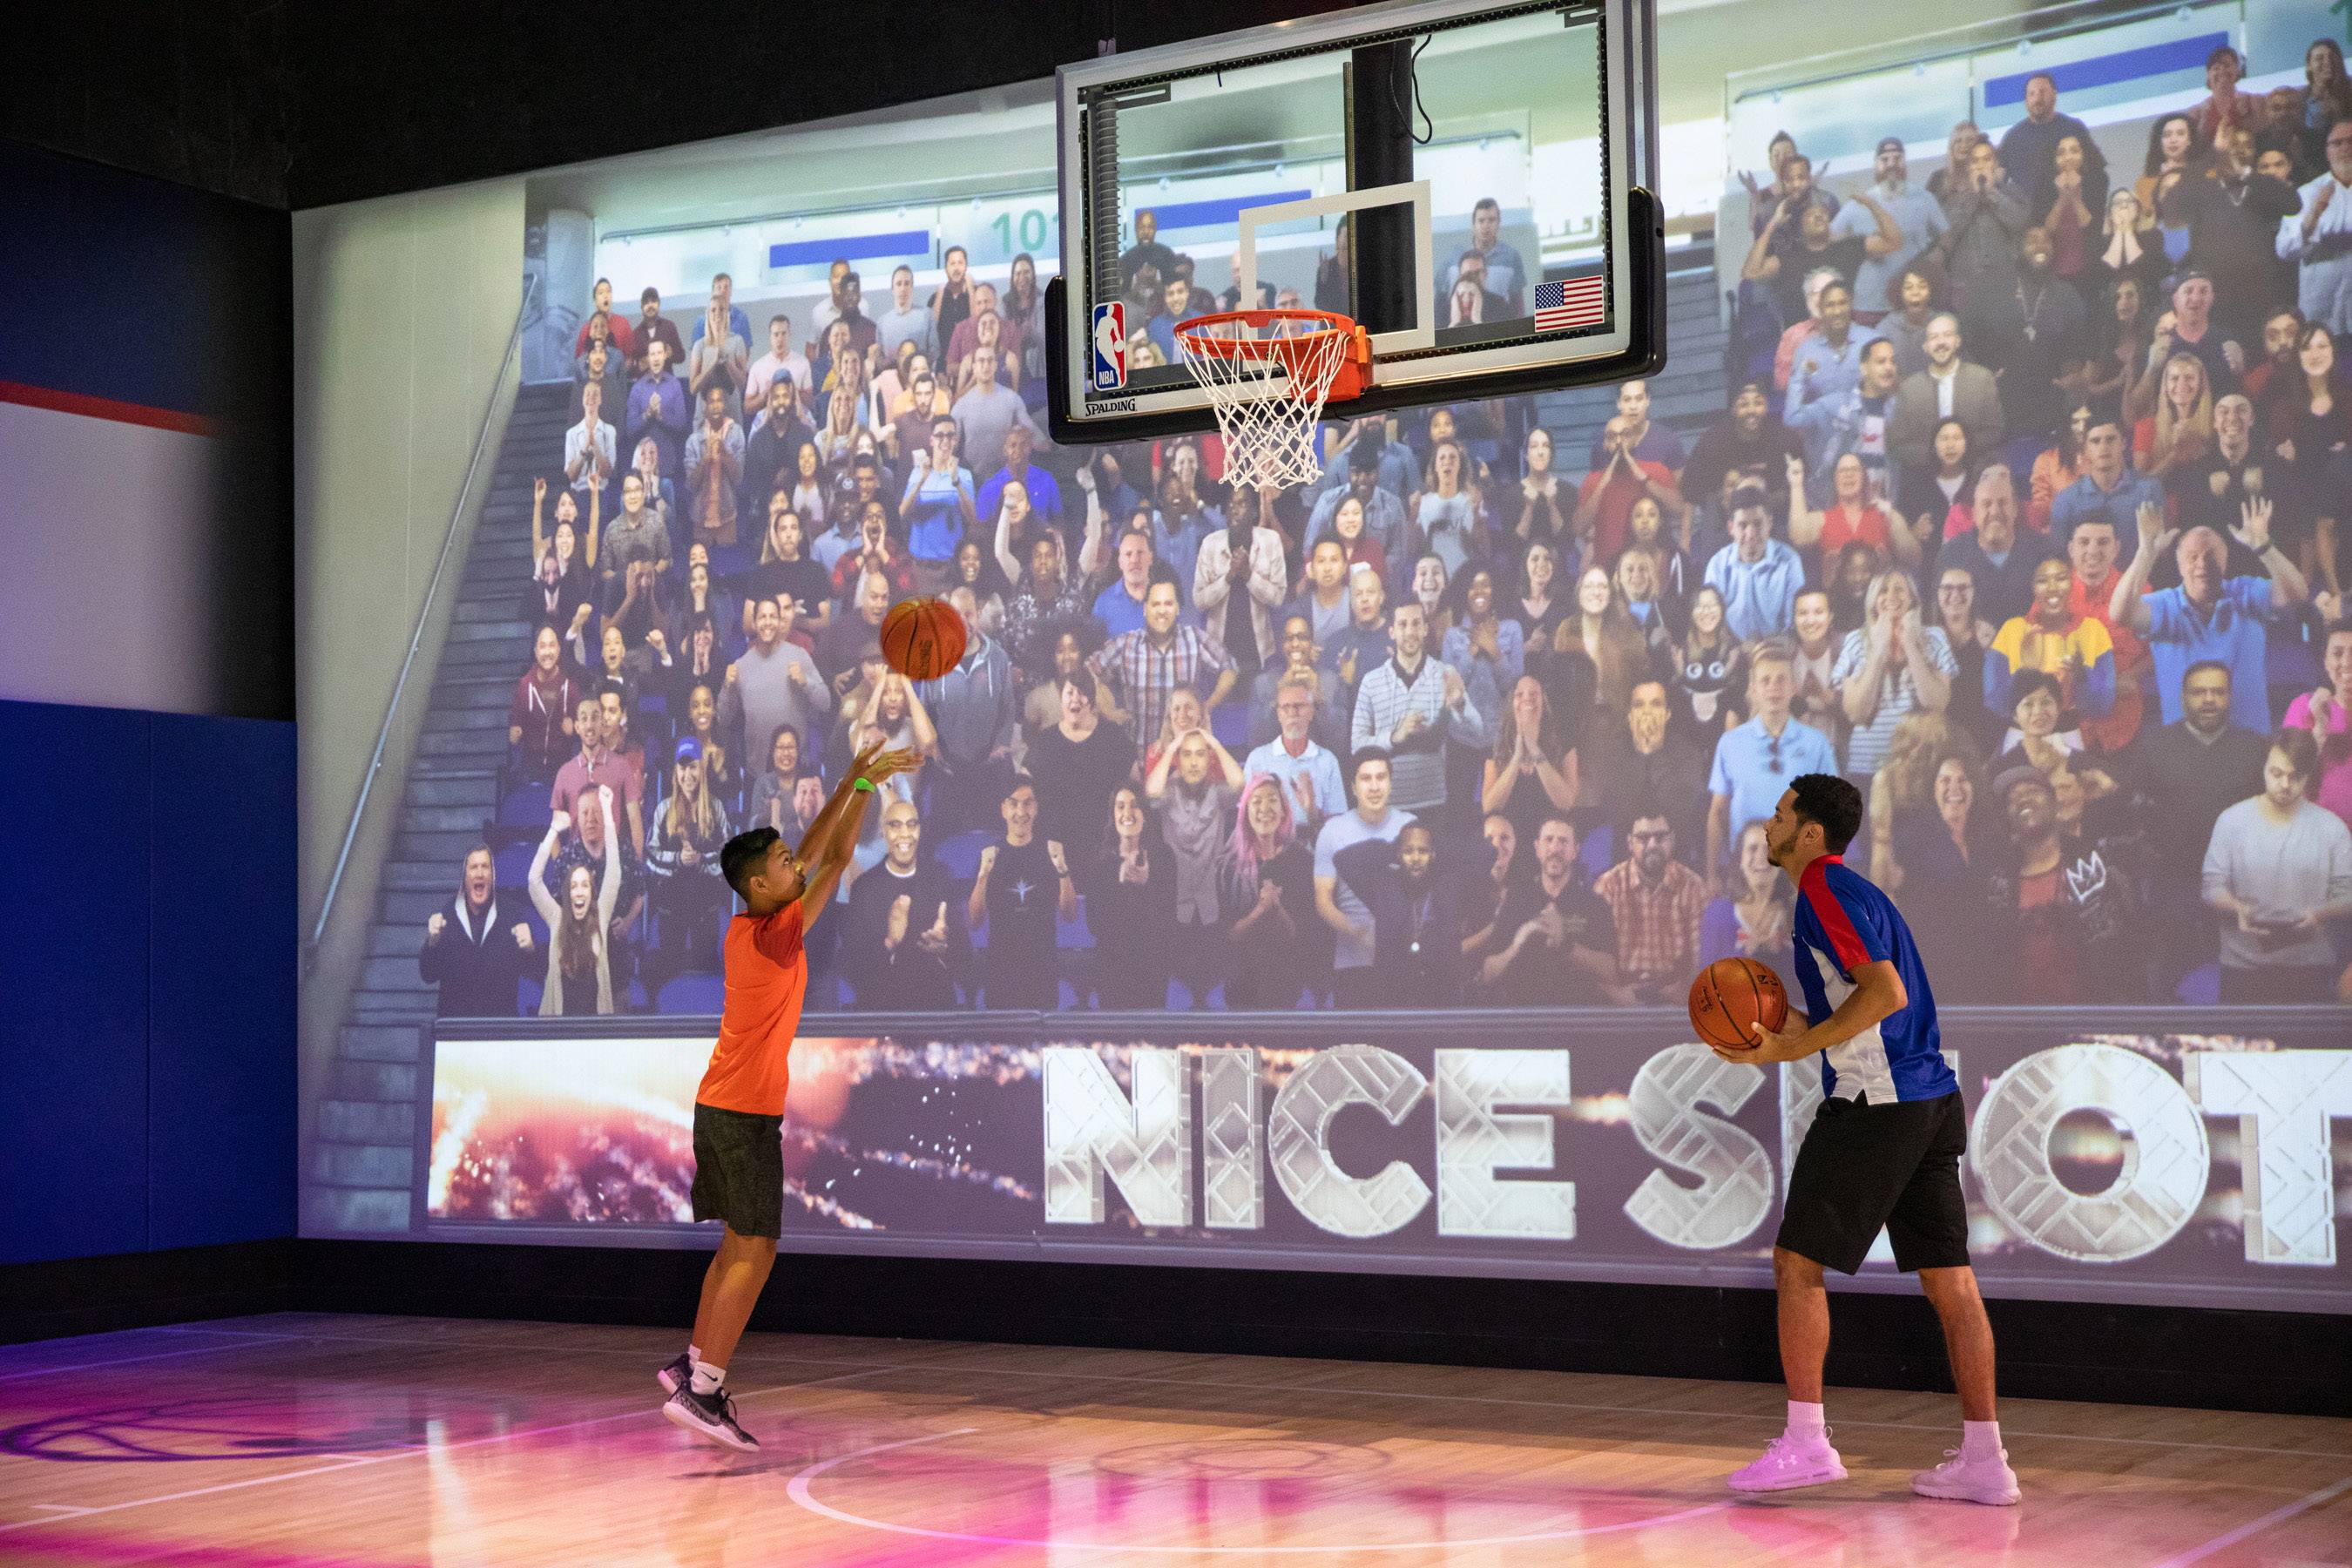 Inside the NBA Experience at Disney Springs